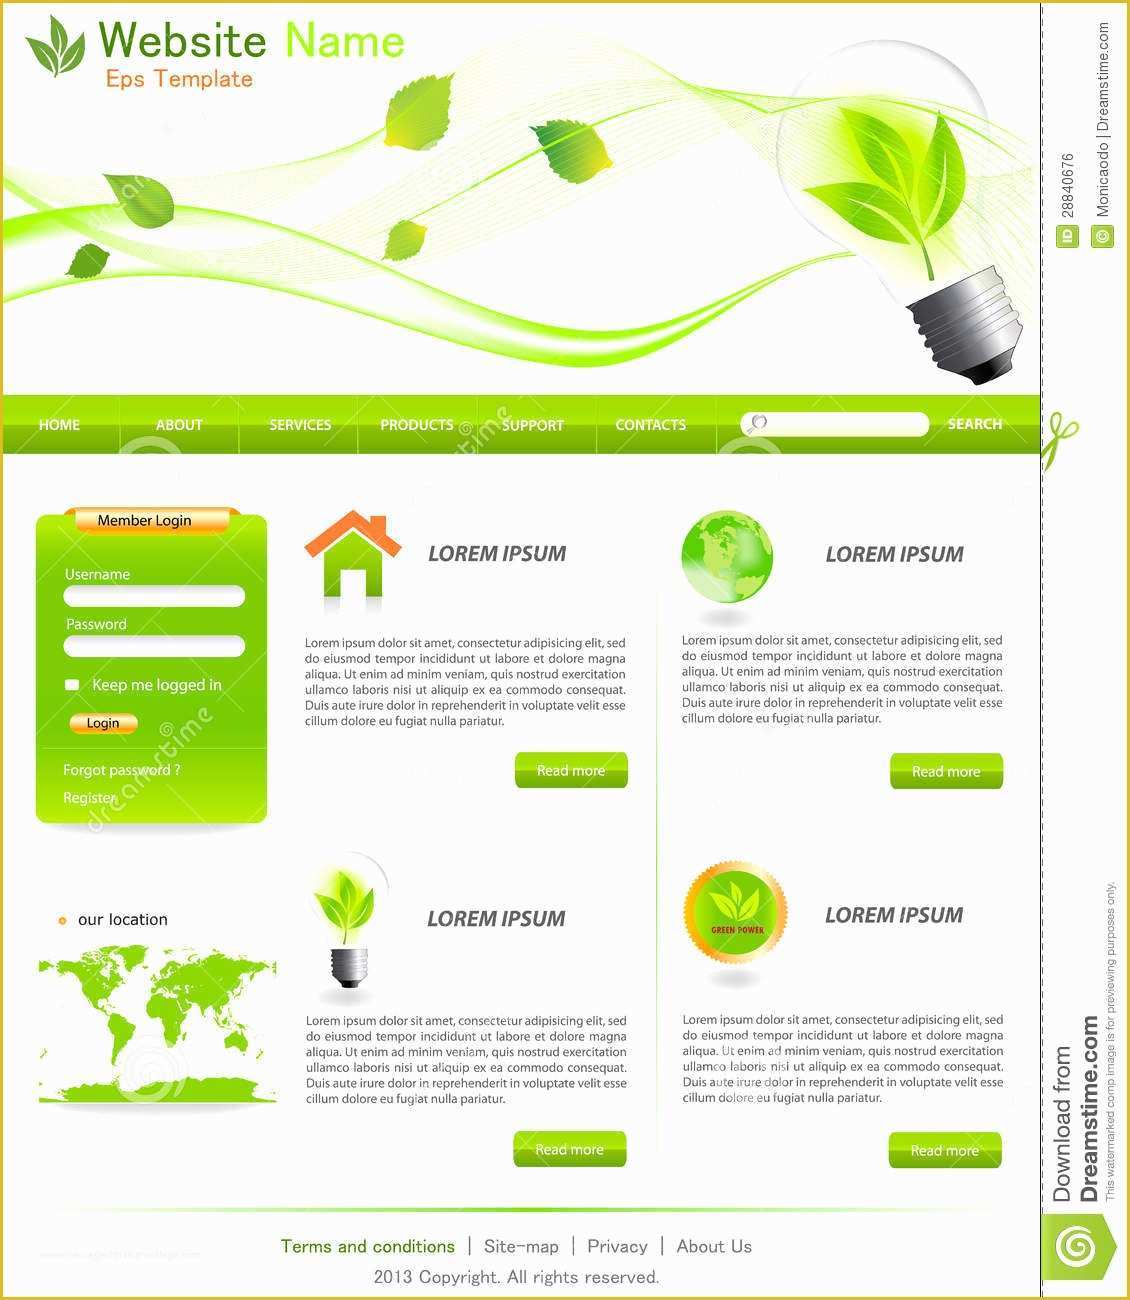 Copyright Free Website Templates Of Green Website Templates Royalty Free Stock Image Image